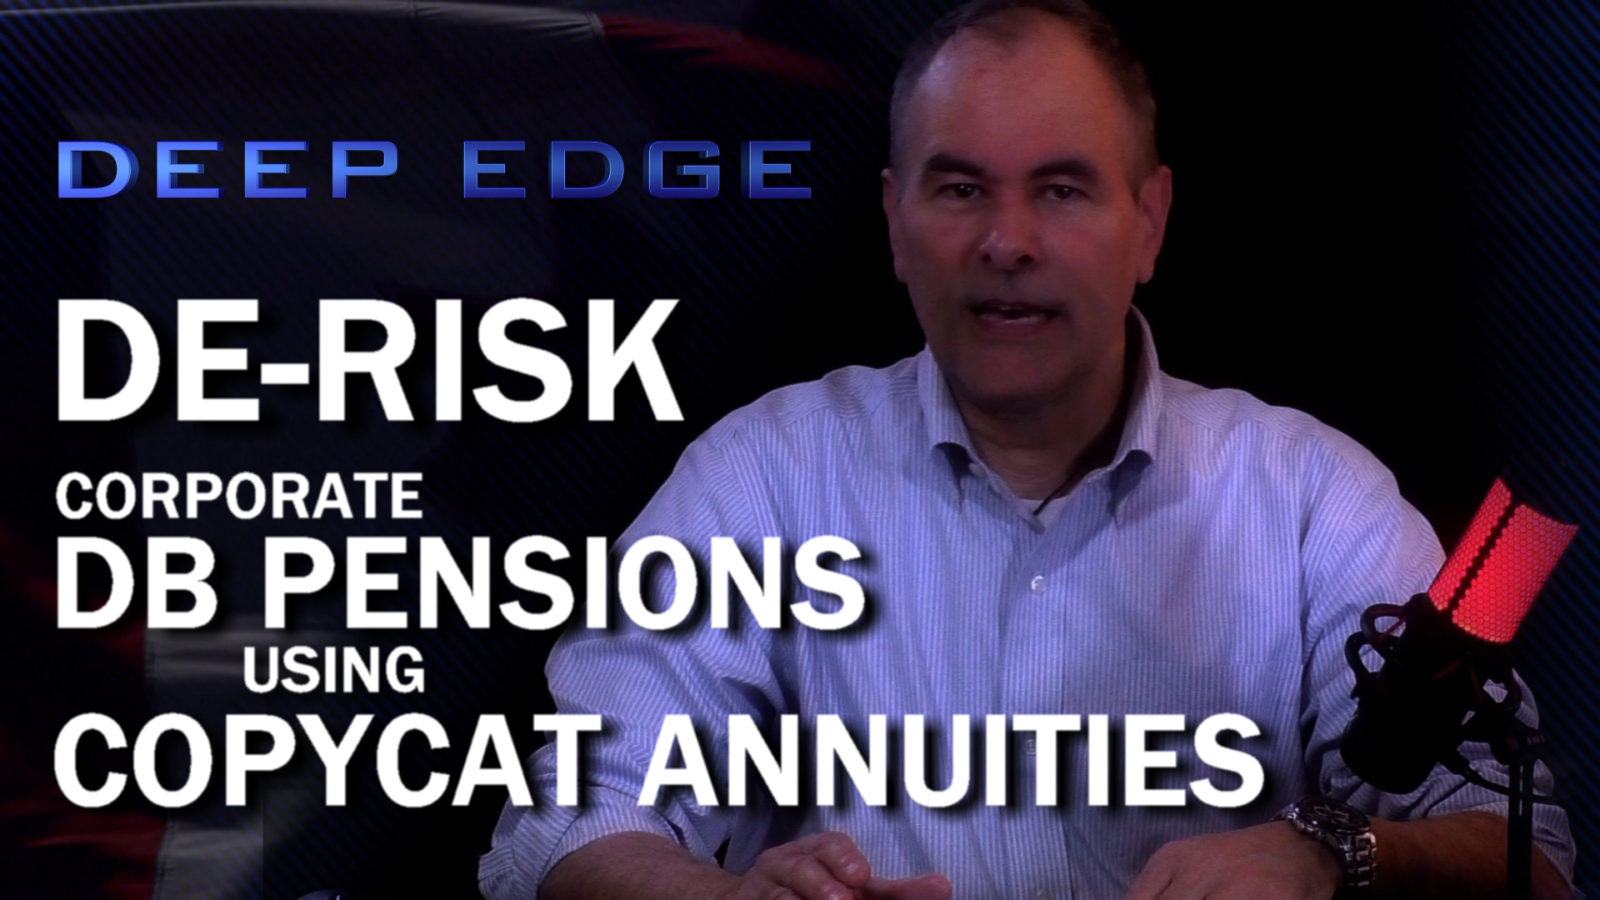 De-Risk Corporate DB Pensions with Copycat Annuities